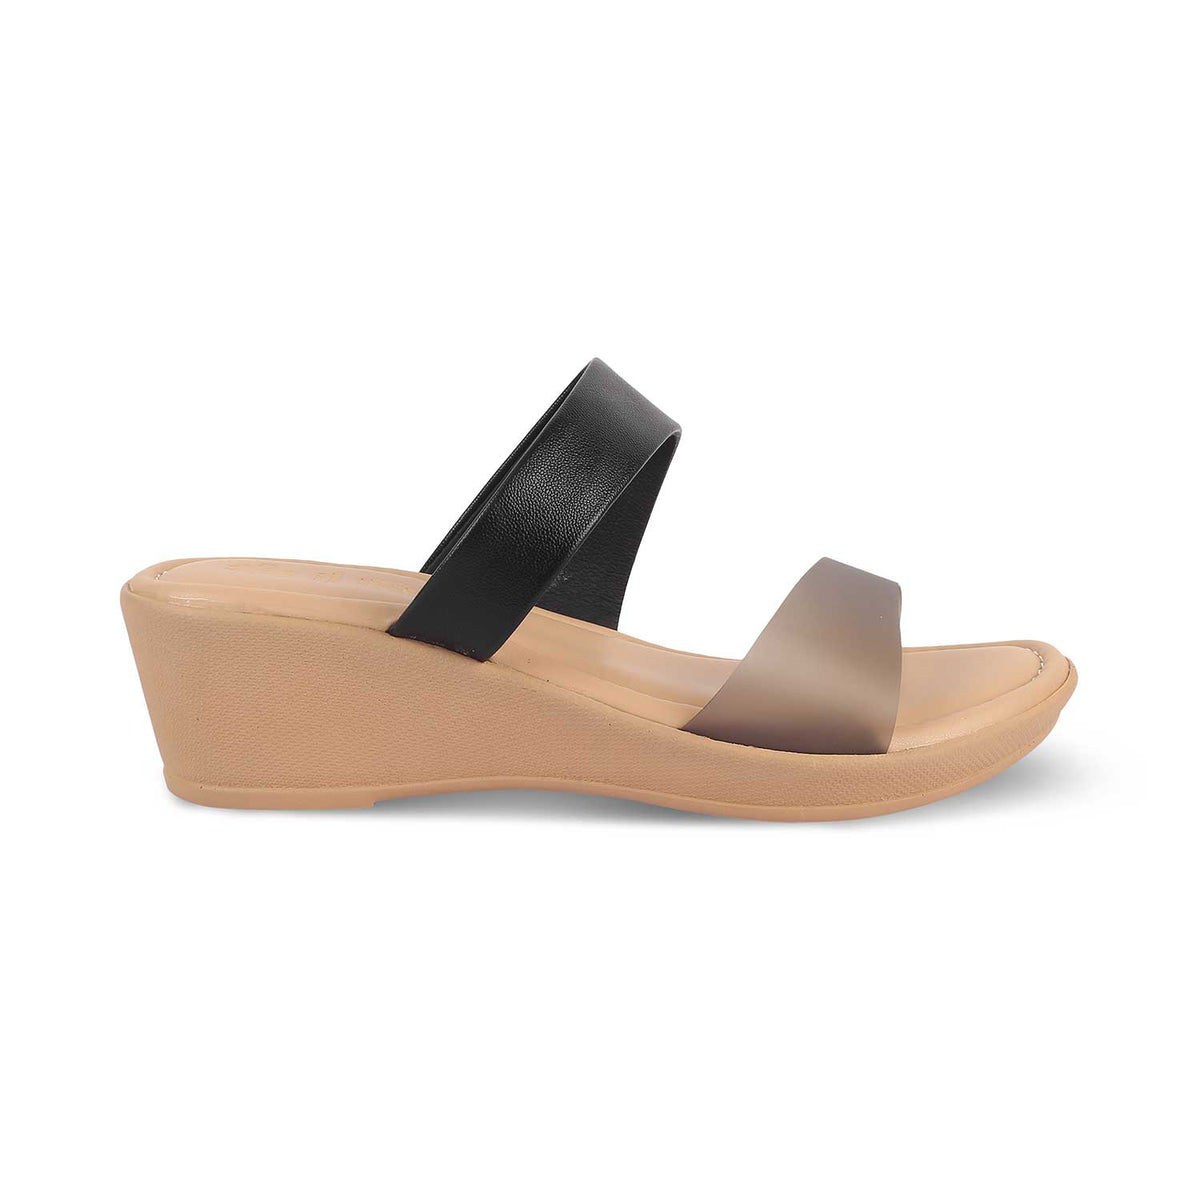 The Sios Black Women's Casual Wedge Sandals Tresmode